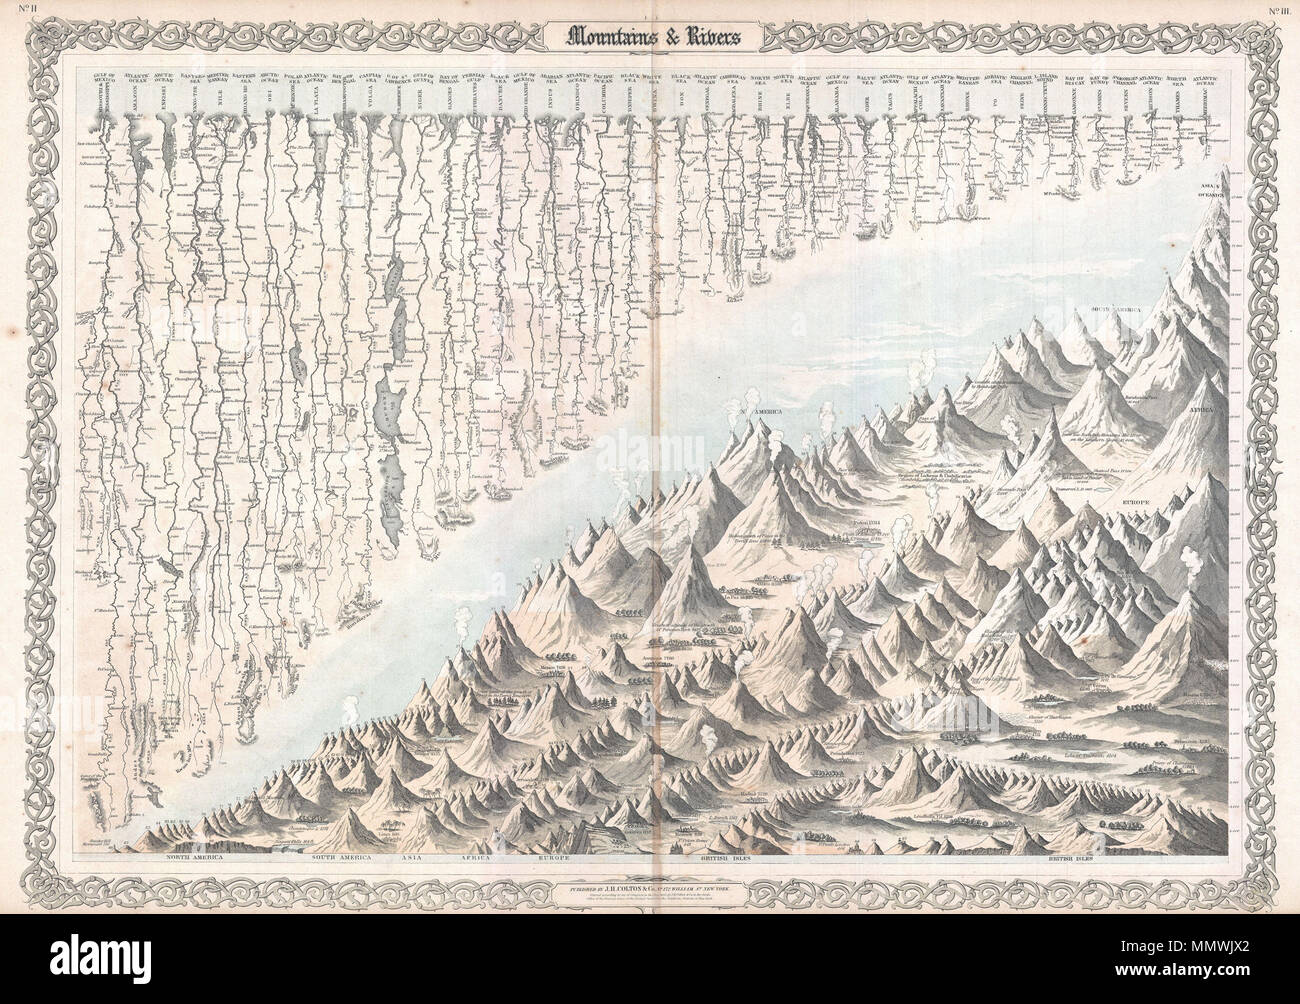 .  English: Most likely the finest American Mountains and Rivers chart or map of the mid 19th century. This is the 1855 Colton prototype for the popular 1860-1863 Johnson’s Mountains and Rivers chart. Depicts the relative distances of the world’s great rivers and the relative heights of the world’s great mountains. Includes a multitude of details regarding the heights of important cities, glaciers, volcanoes, and tree lines. Even includes Niagara Falls, the Great Pyramid, St. Peter’s Basilica in Rome and St. Paul’s in London. Also notes curiosities that would have been relevant at the time, su Stock Photo